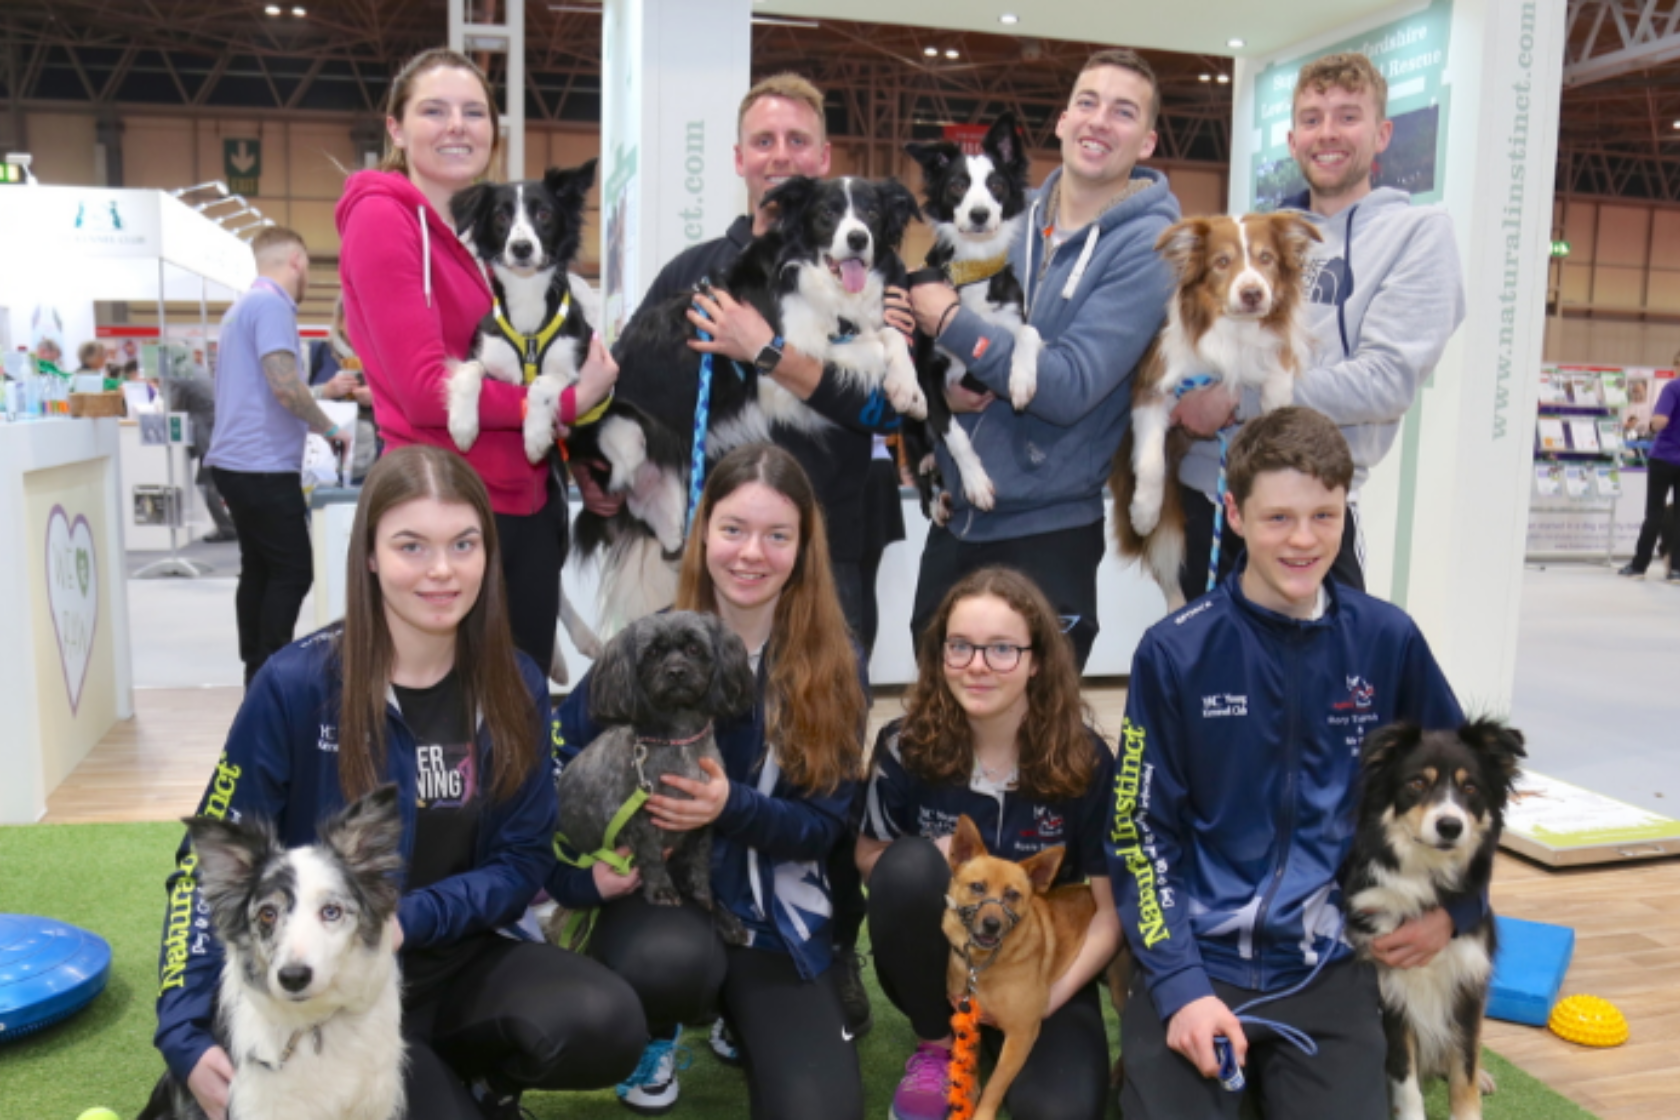 World Class Agility Trainer and Valued Member of Agility Team GB, Dave Munnings with a group of people and their dogs